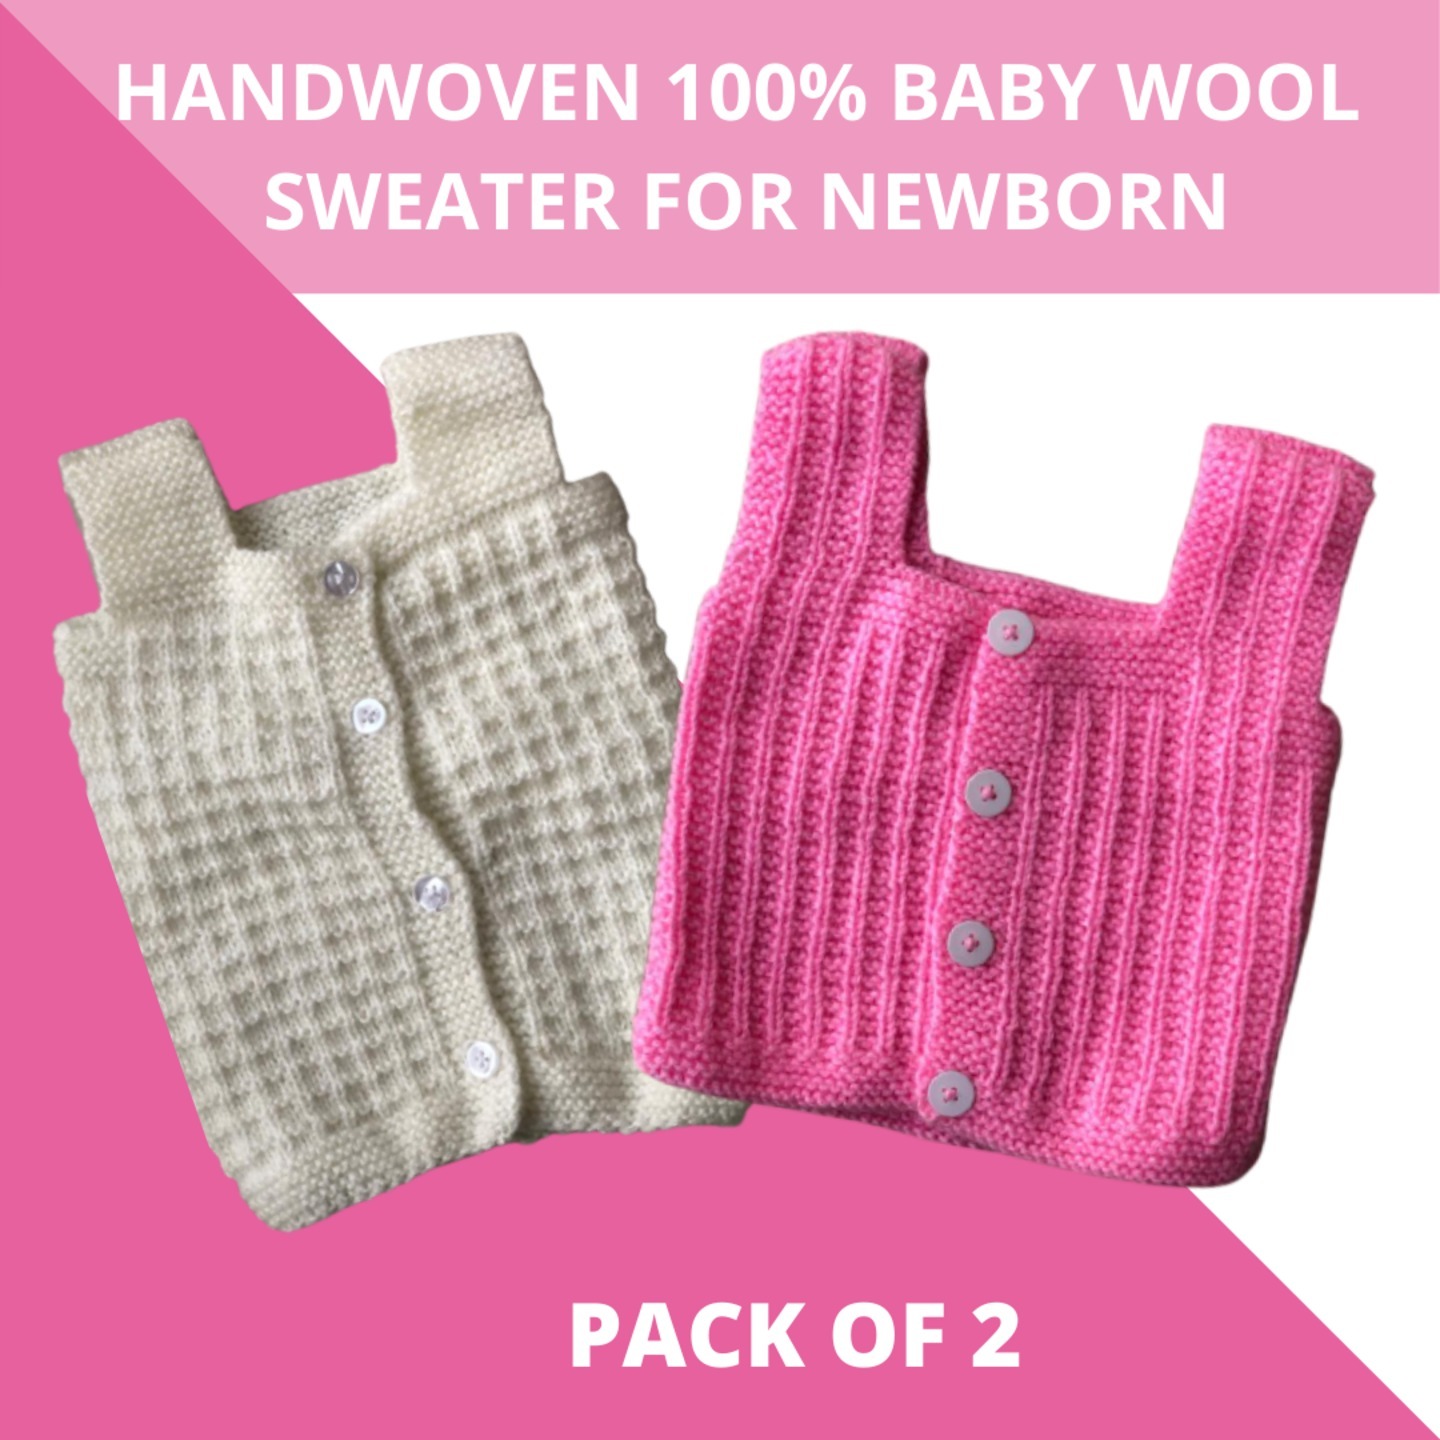 Hand-knitted Half Sleeves Sweater for Newborn 0-3 Months pack of 2